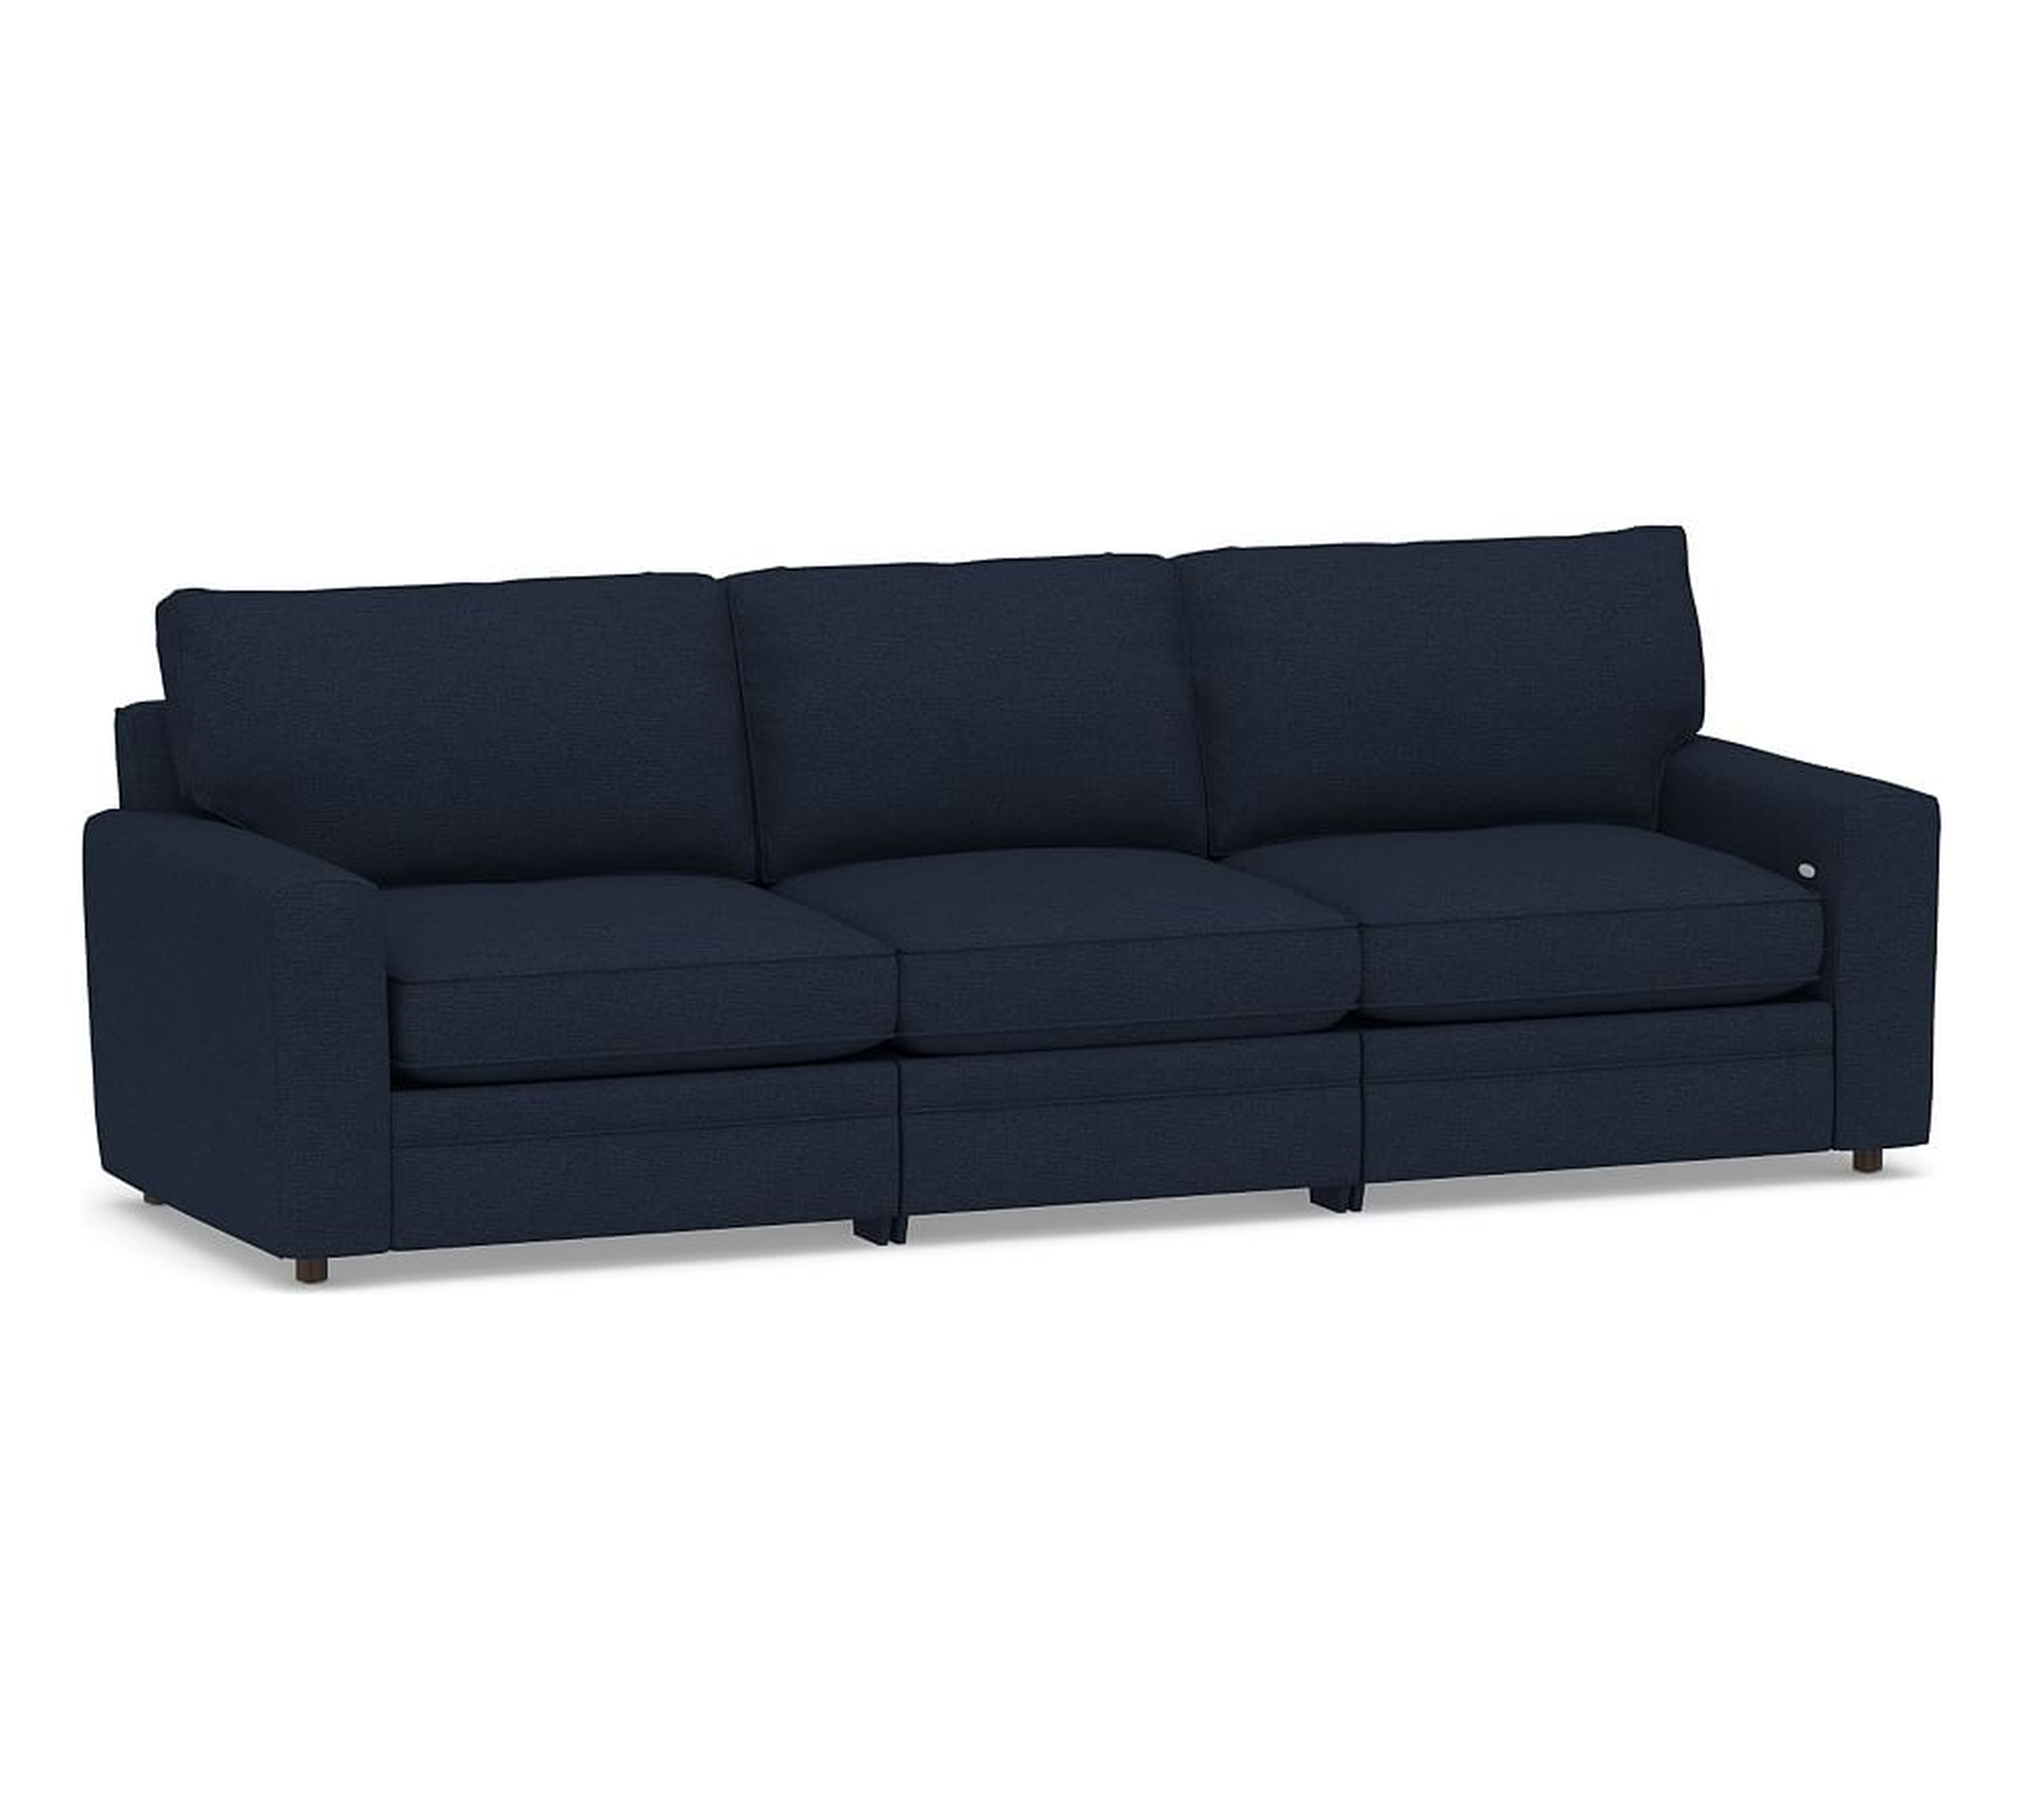 Pearce Square Arm Upholstered 3-Piece Reclining Sofa Sectional, Down Blend Wrapped Cushions, Performance Heathered Basketweave Navy - Pottery Barn